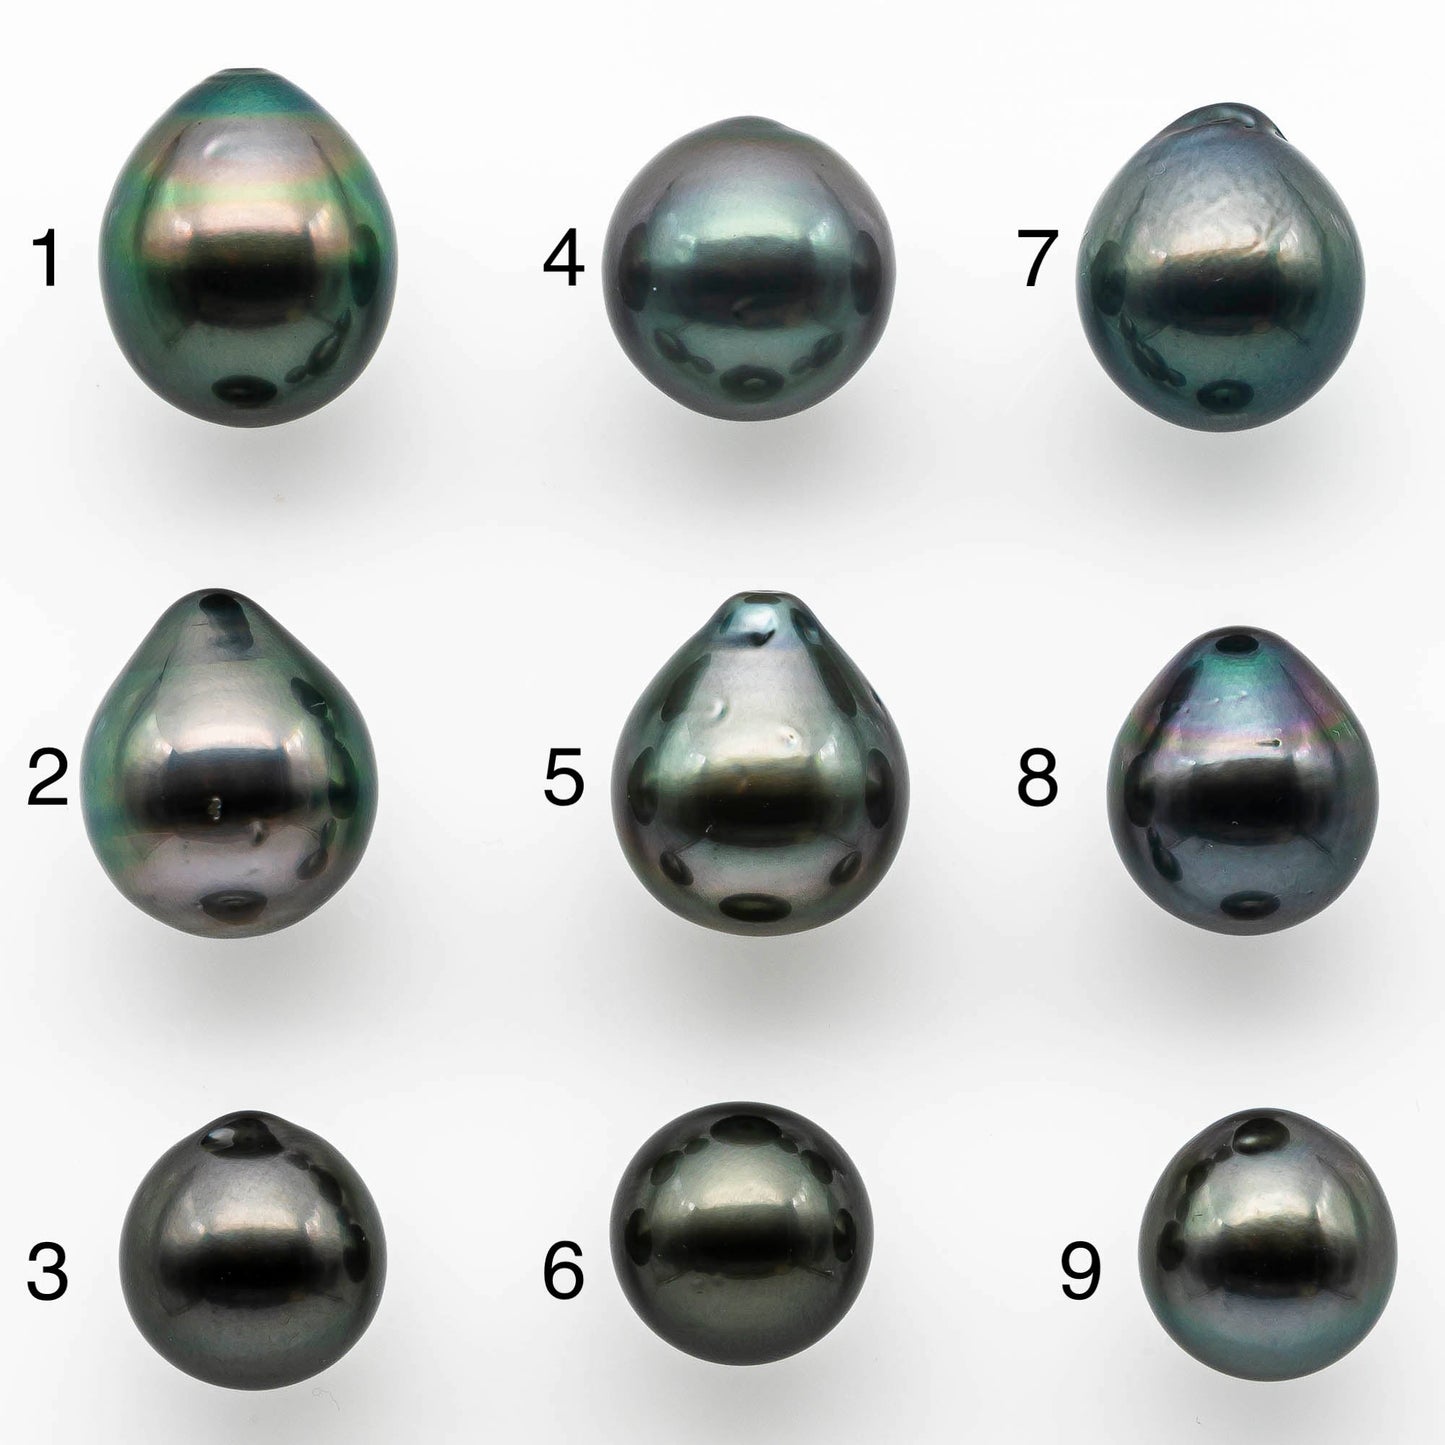 12-14mm Tahitian Pearl High Quality Undrilled Loose with Minimum Blemish in Natural Color and Beautiful Luster, 1 Single Piece, SKU # 1413TH